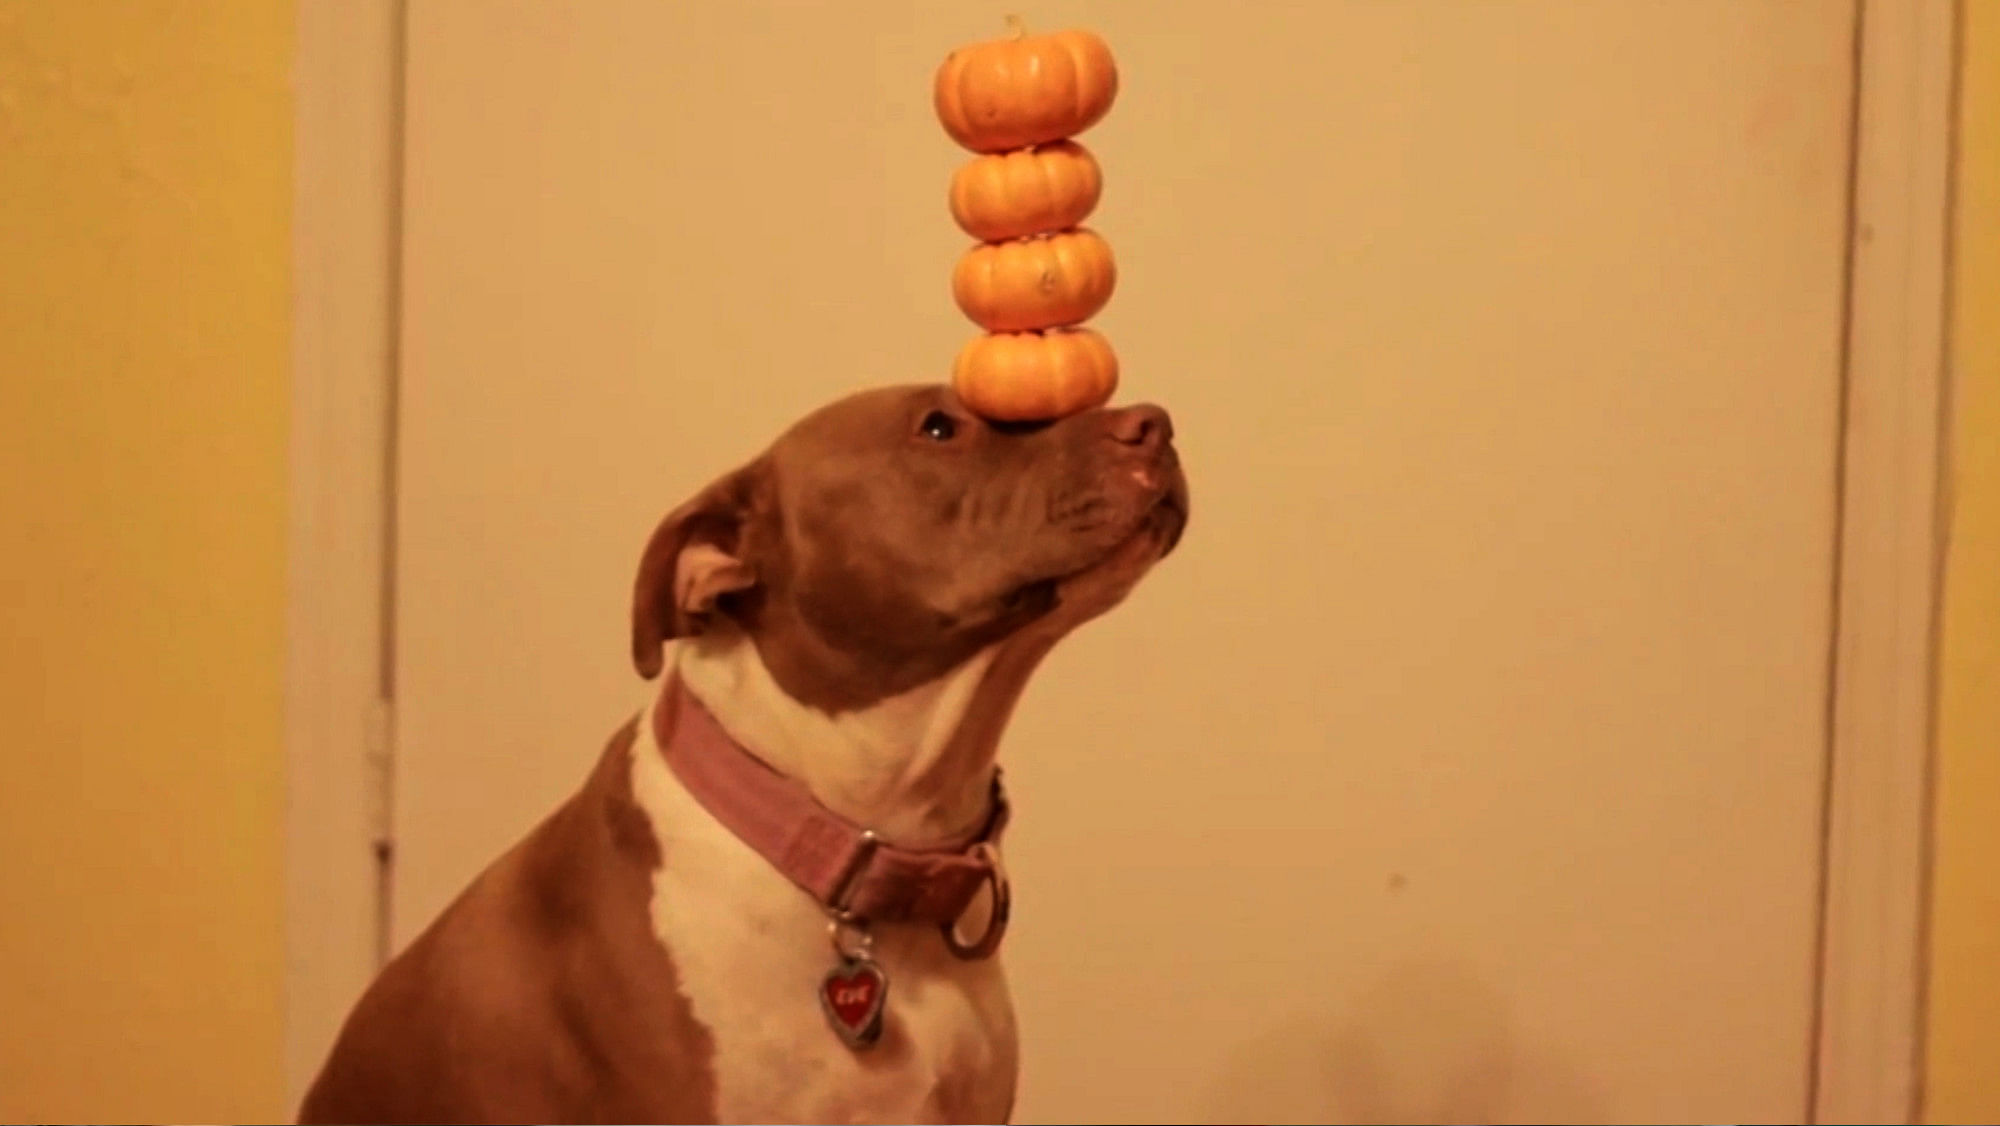 Eve, the Pit Bull, performs an amazing Halloween trick by balancing four baby pumpkins on her nose. (Photo: AP/Newsflare screengrab)